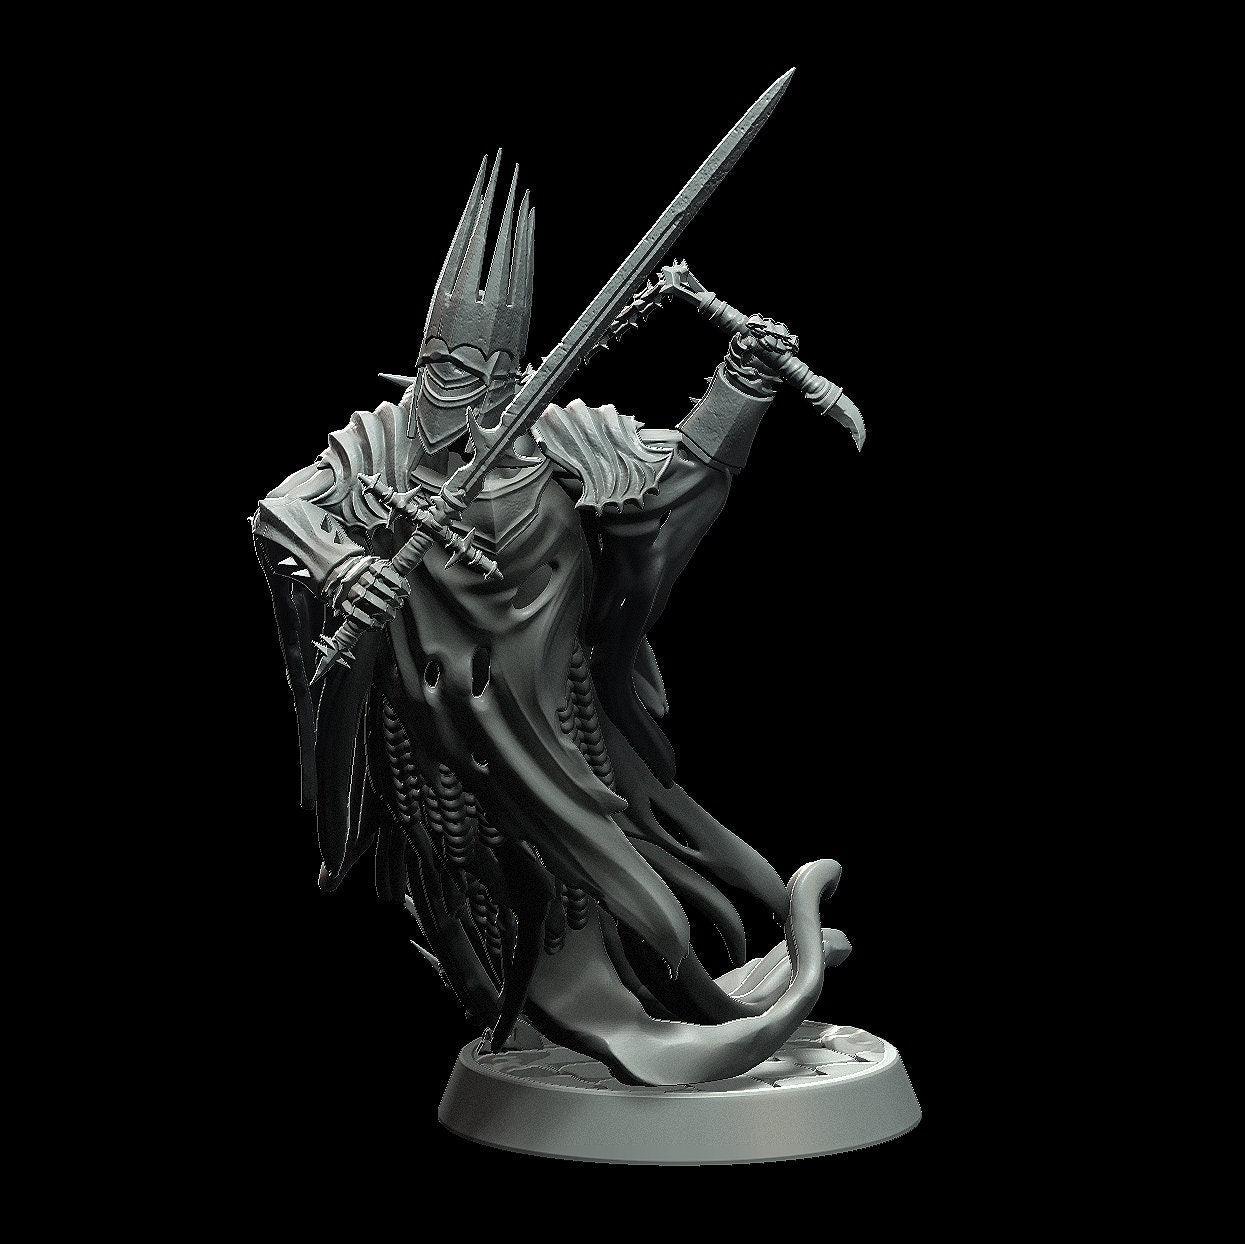 Wrath King Miniature - 3 Poses - 28mm scale Tabletop gaming DnD Miniature Dungeons and Dragons dnd 5e - Plague Miniatures shop for DnD Miniatures